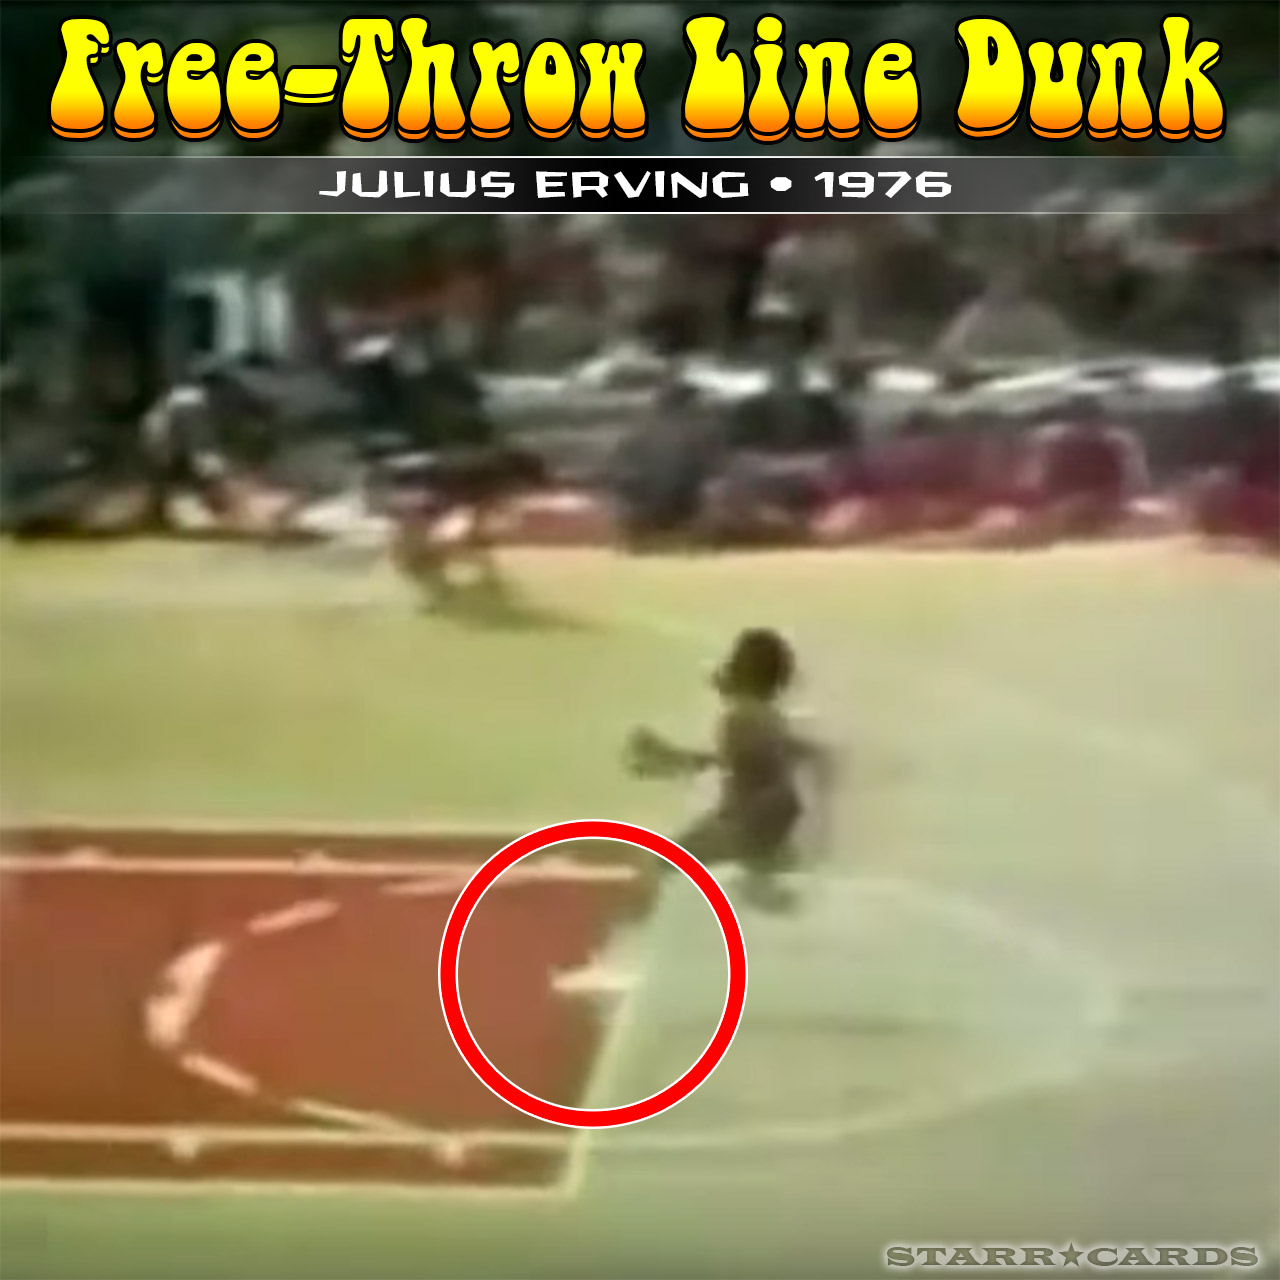 This day in history: Michael Jordan's legendary free-throw line